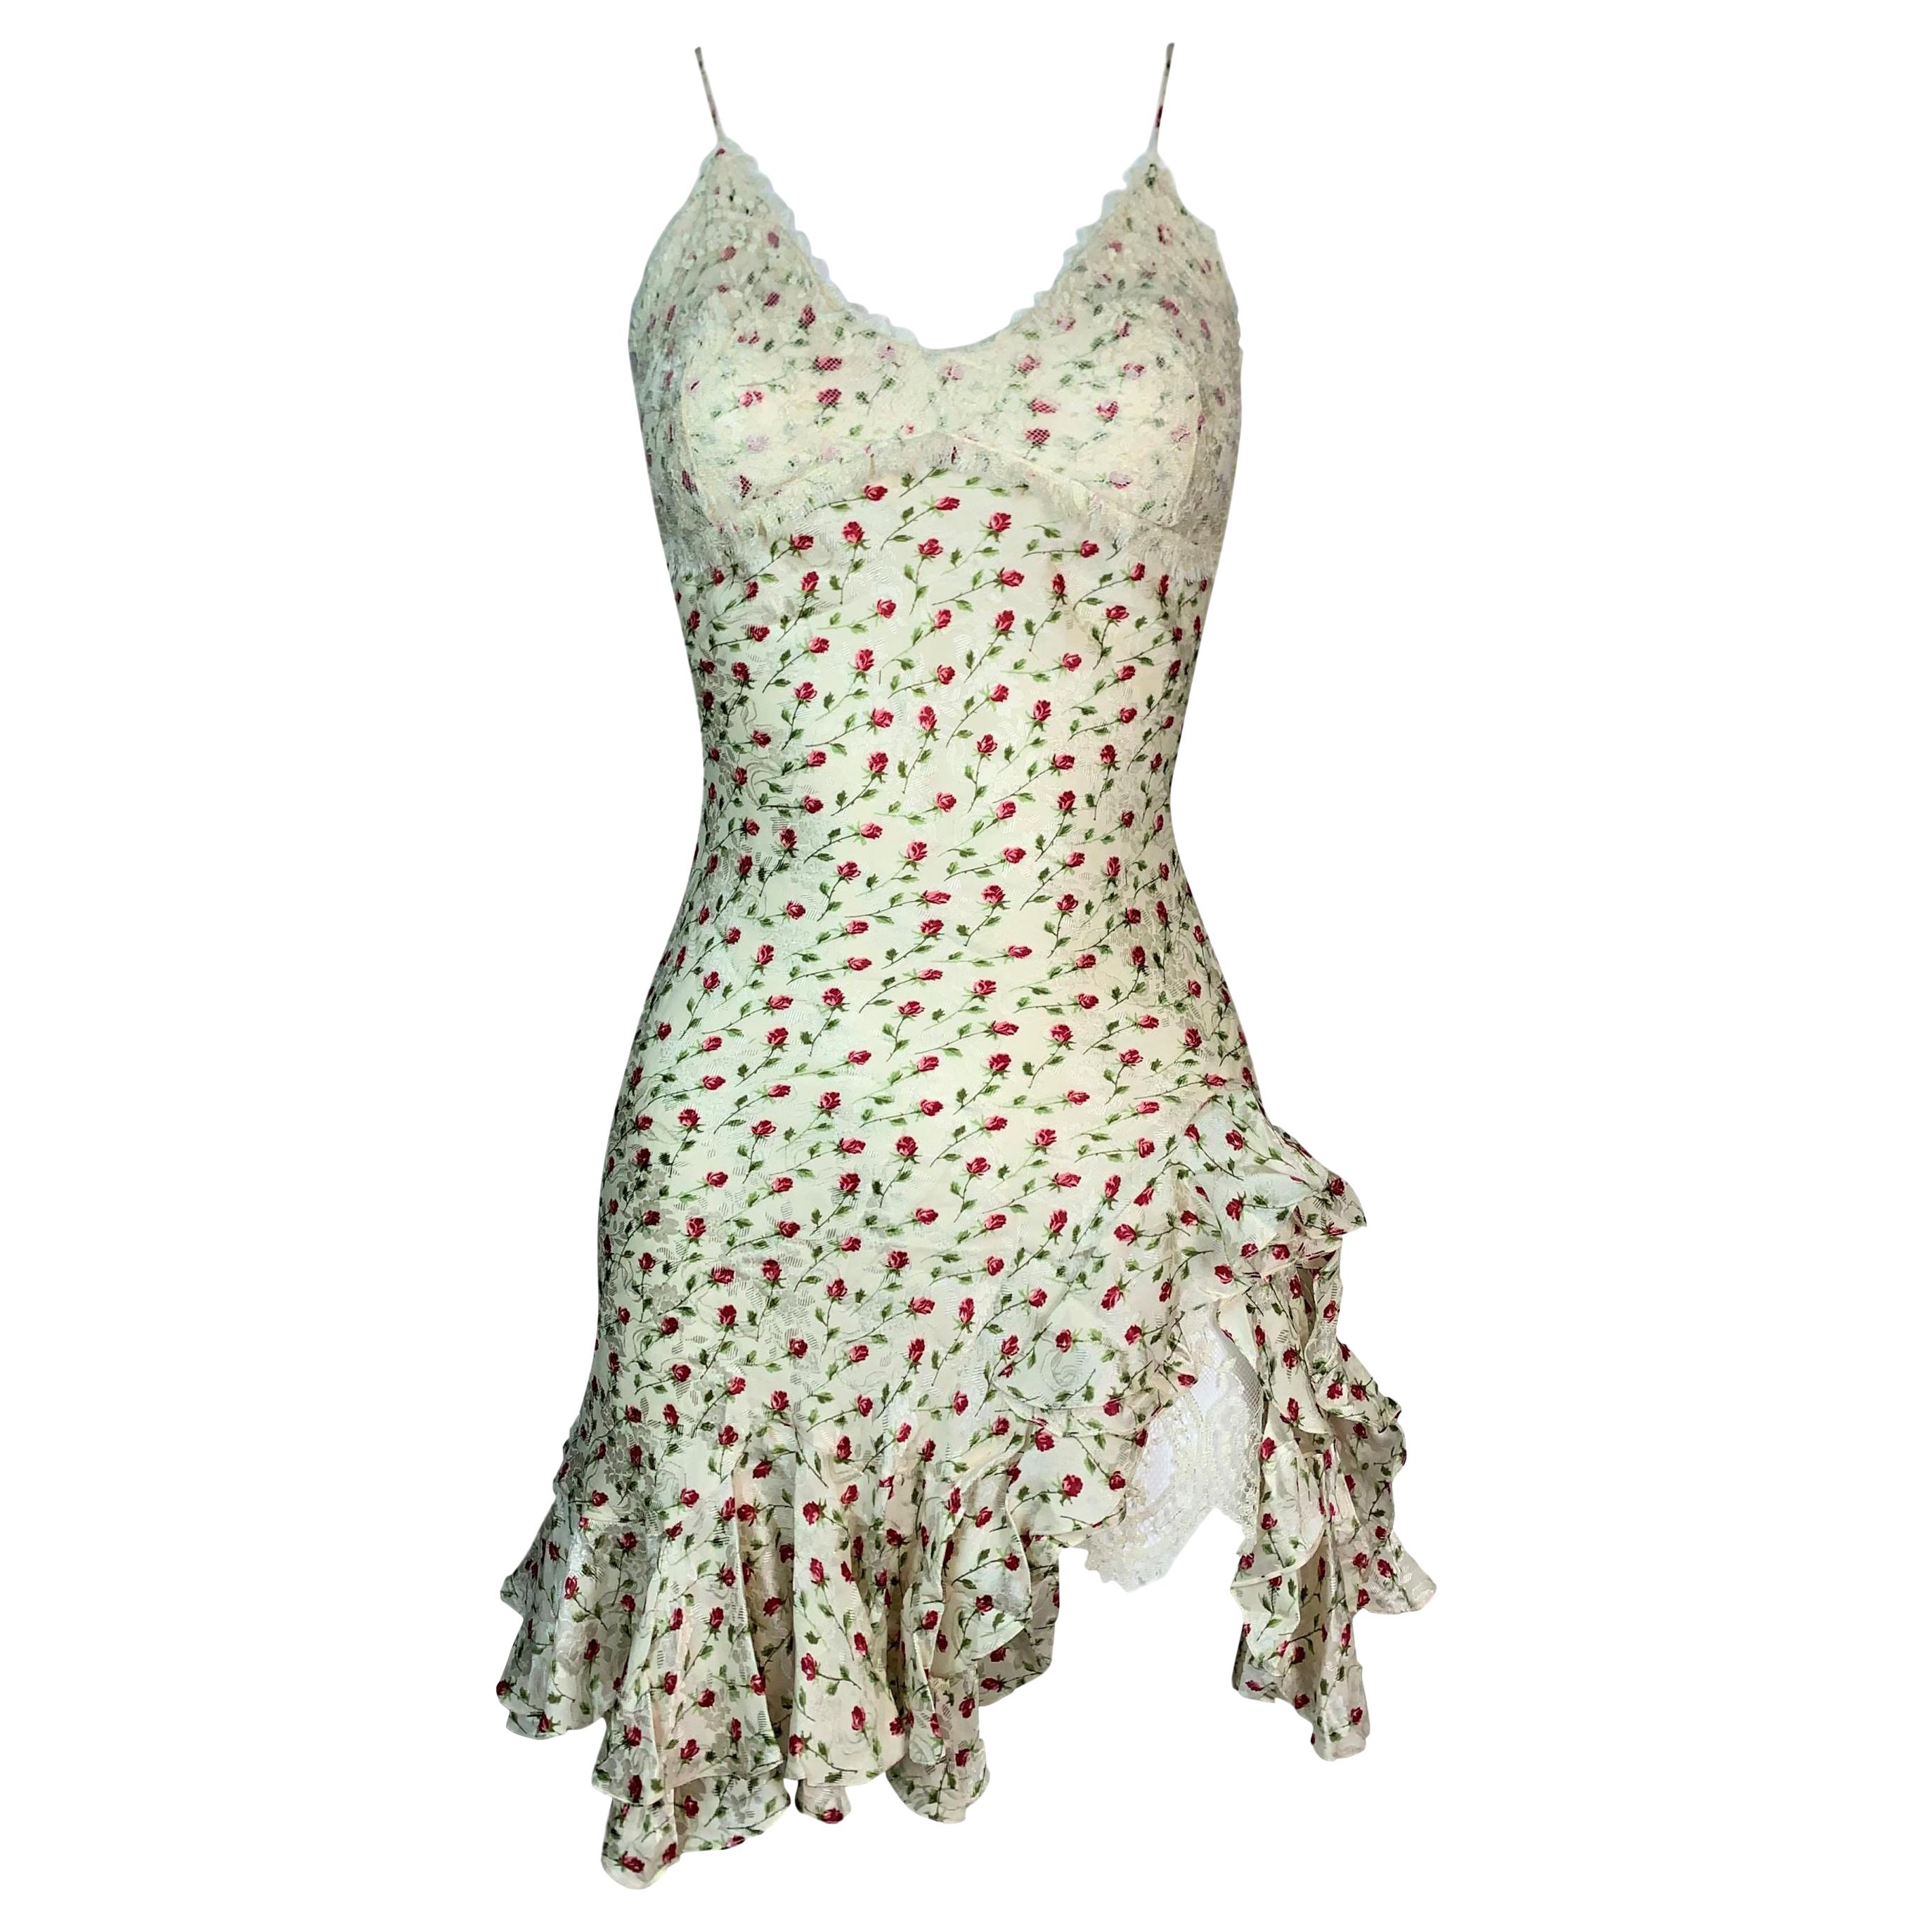 S/S 1997 John Galliano Ivory Silk Floral Can-Can High Slit Lace Mini Dress For Sale